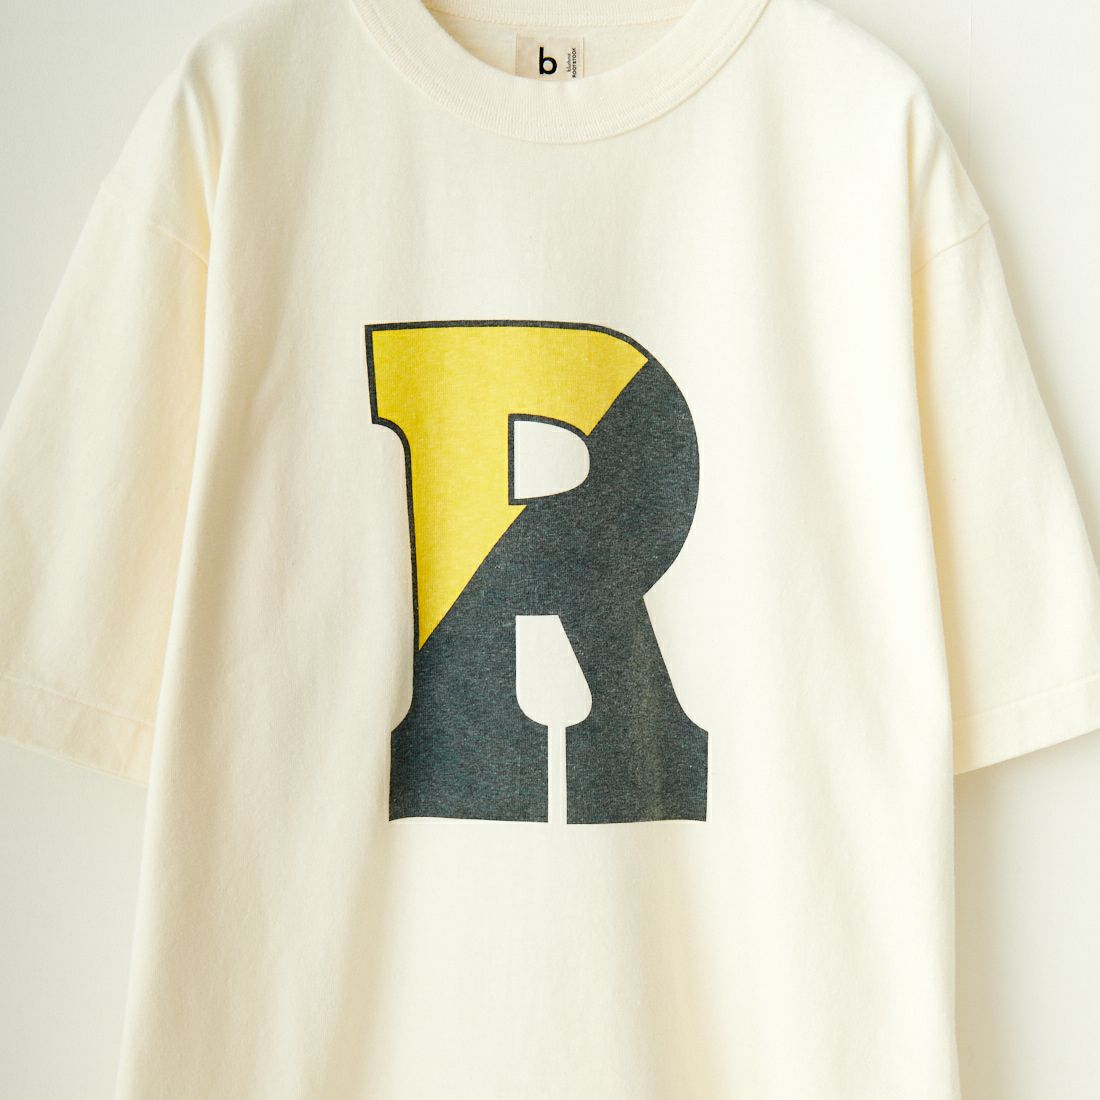 blurhms ROOTSTOCK [ブラームス ルーツストック] スタンダード プリントTシャツ [BROOTS24S26D] 01 IVORY